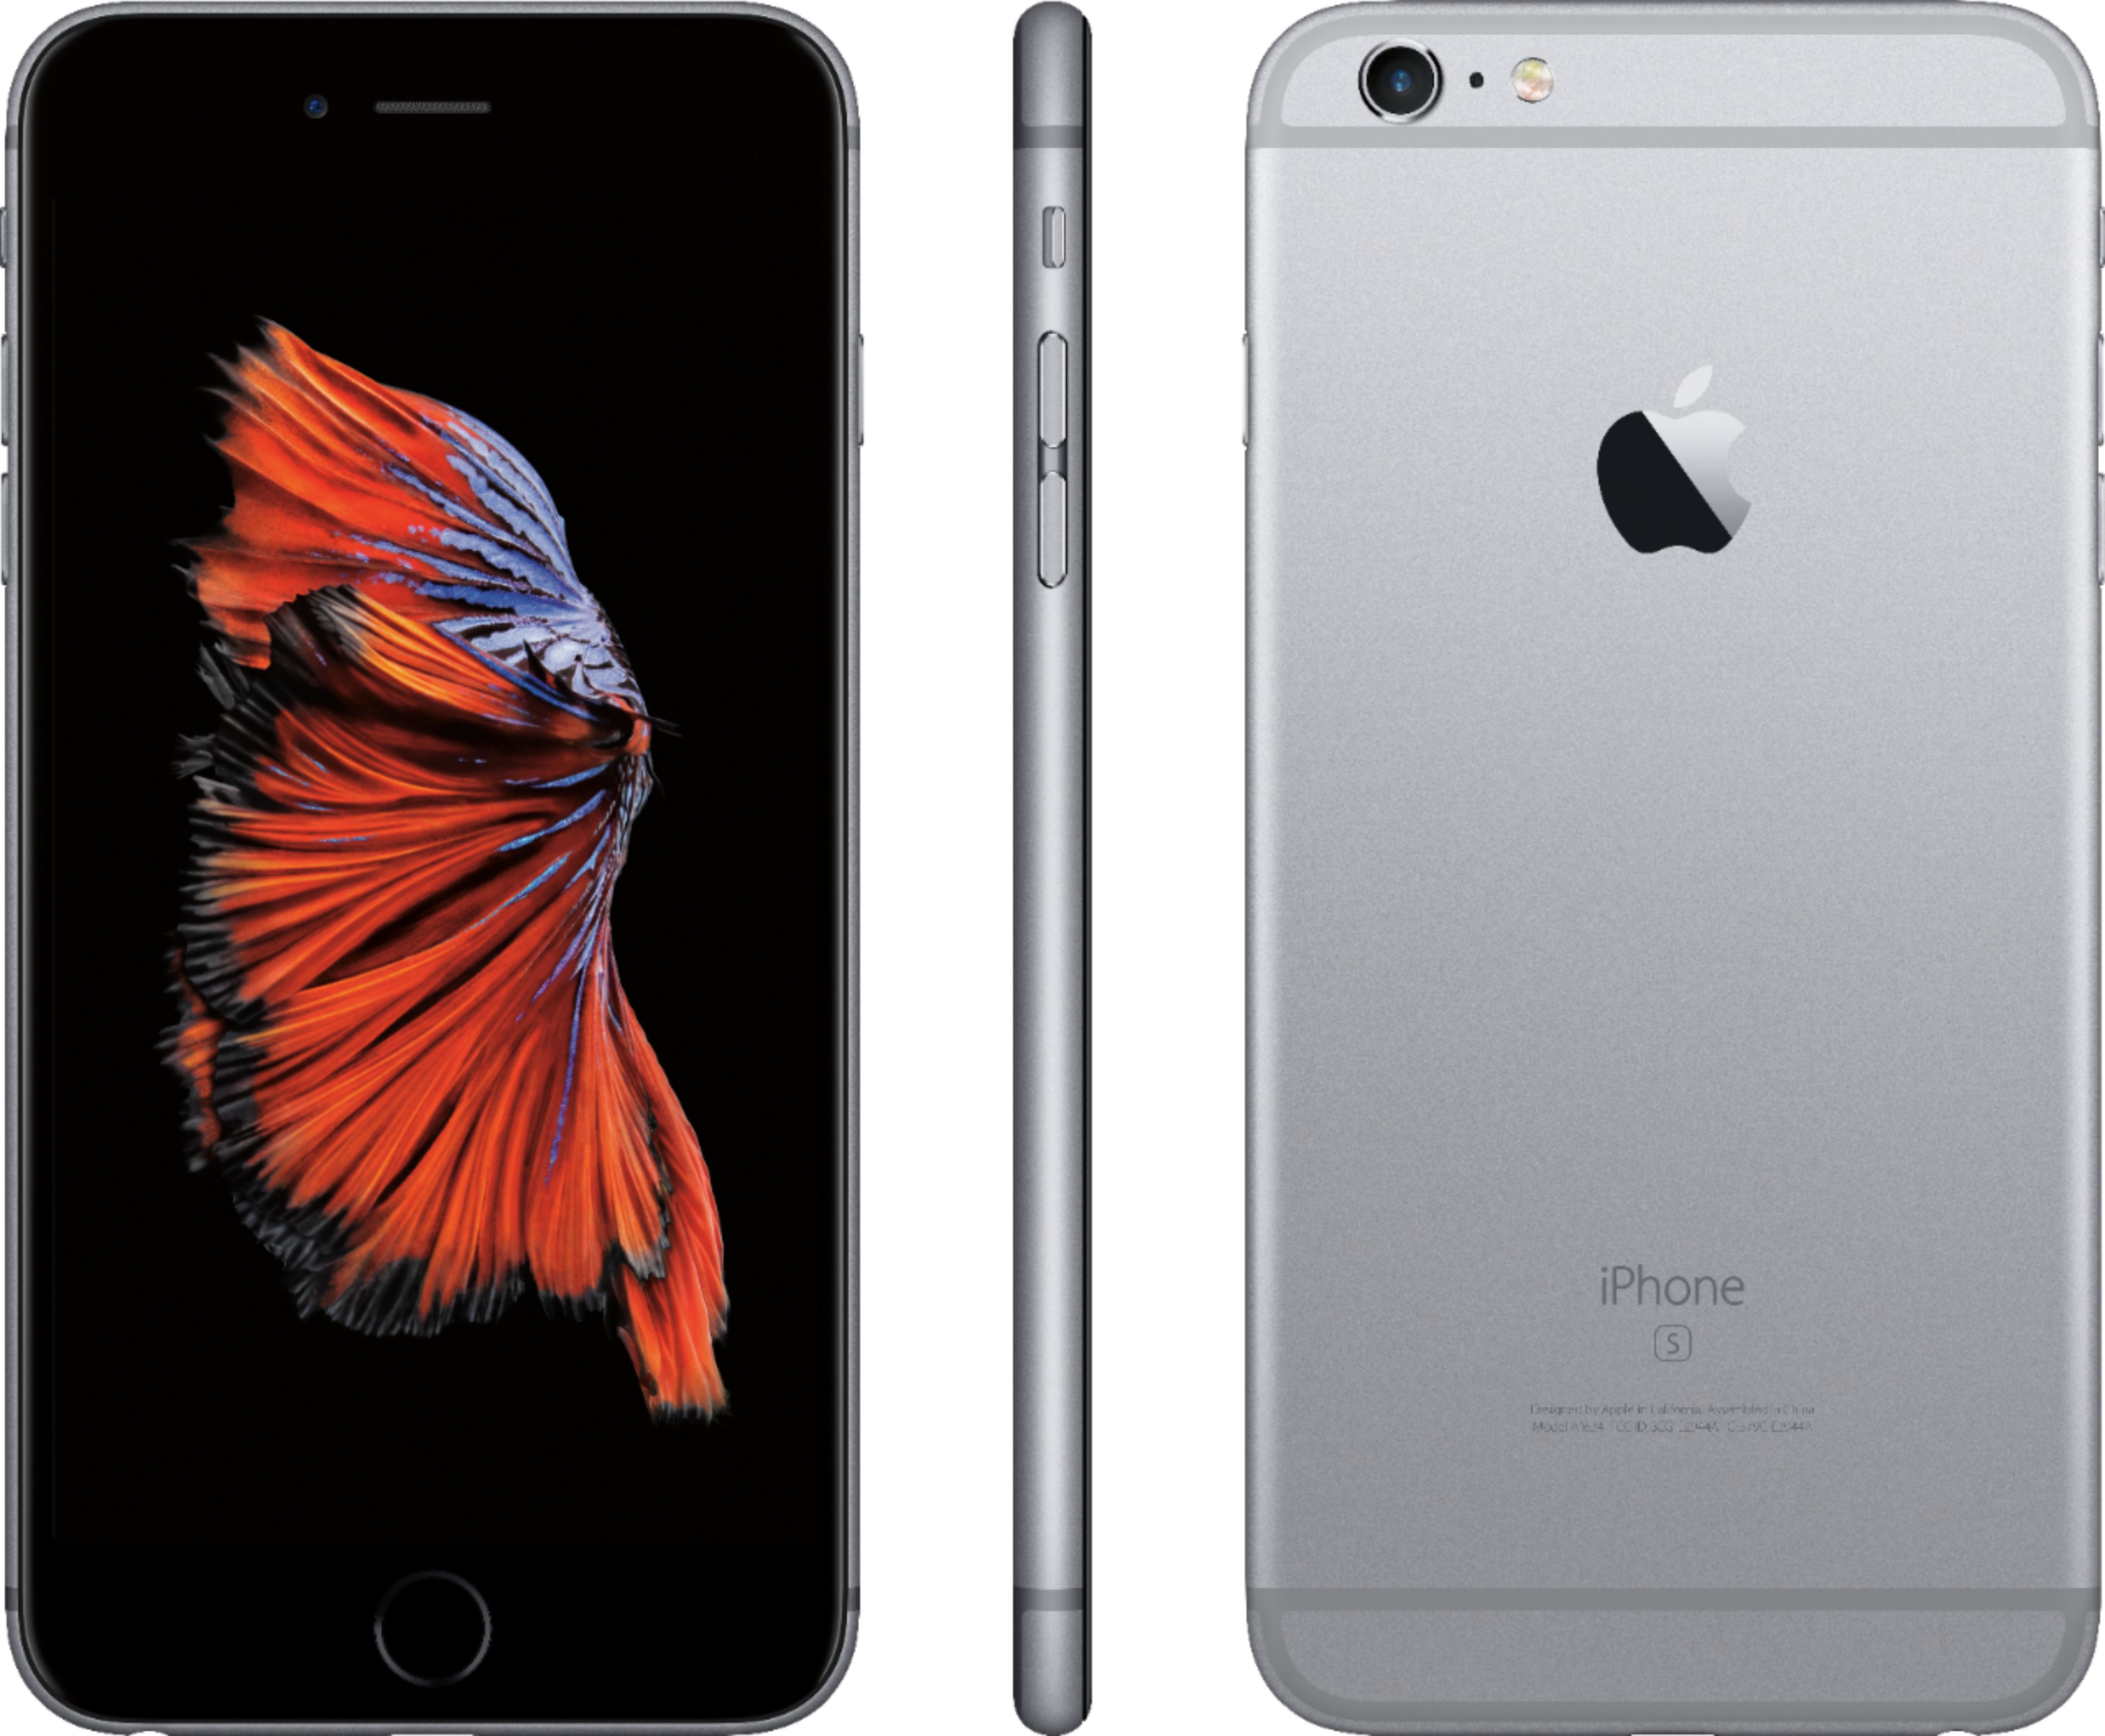 Customer Reviews: Apple iPhone 6s Plus with 32GB Memory Prepaid Cell ...